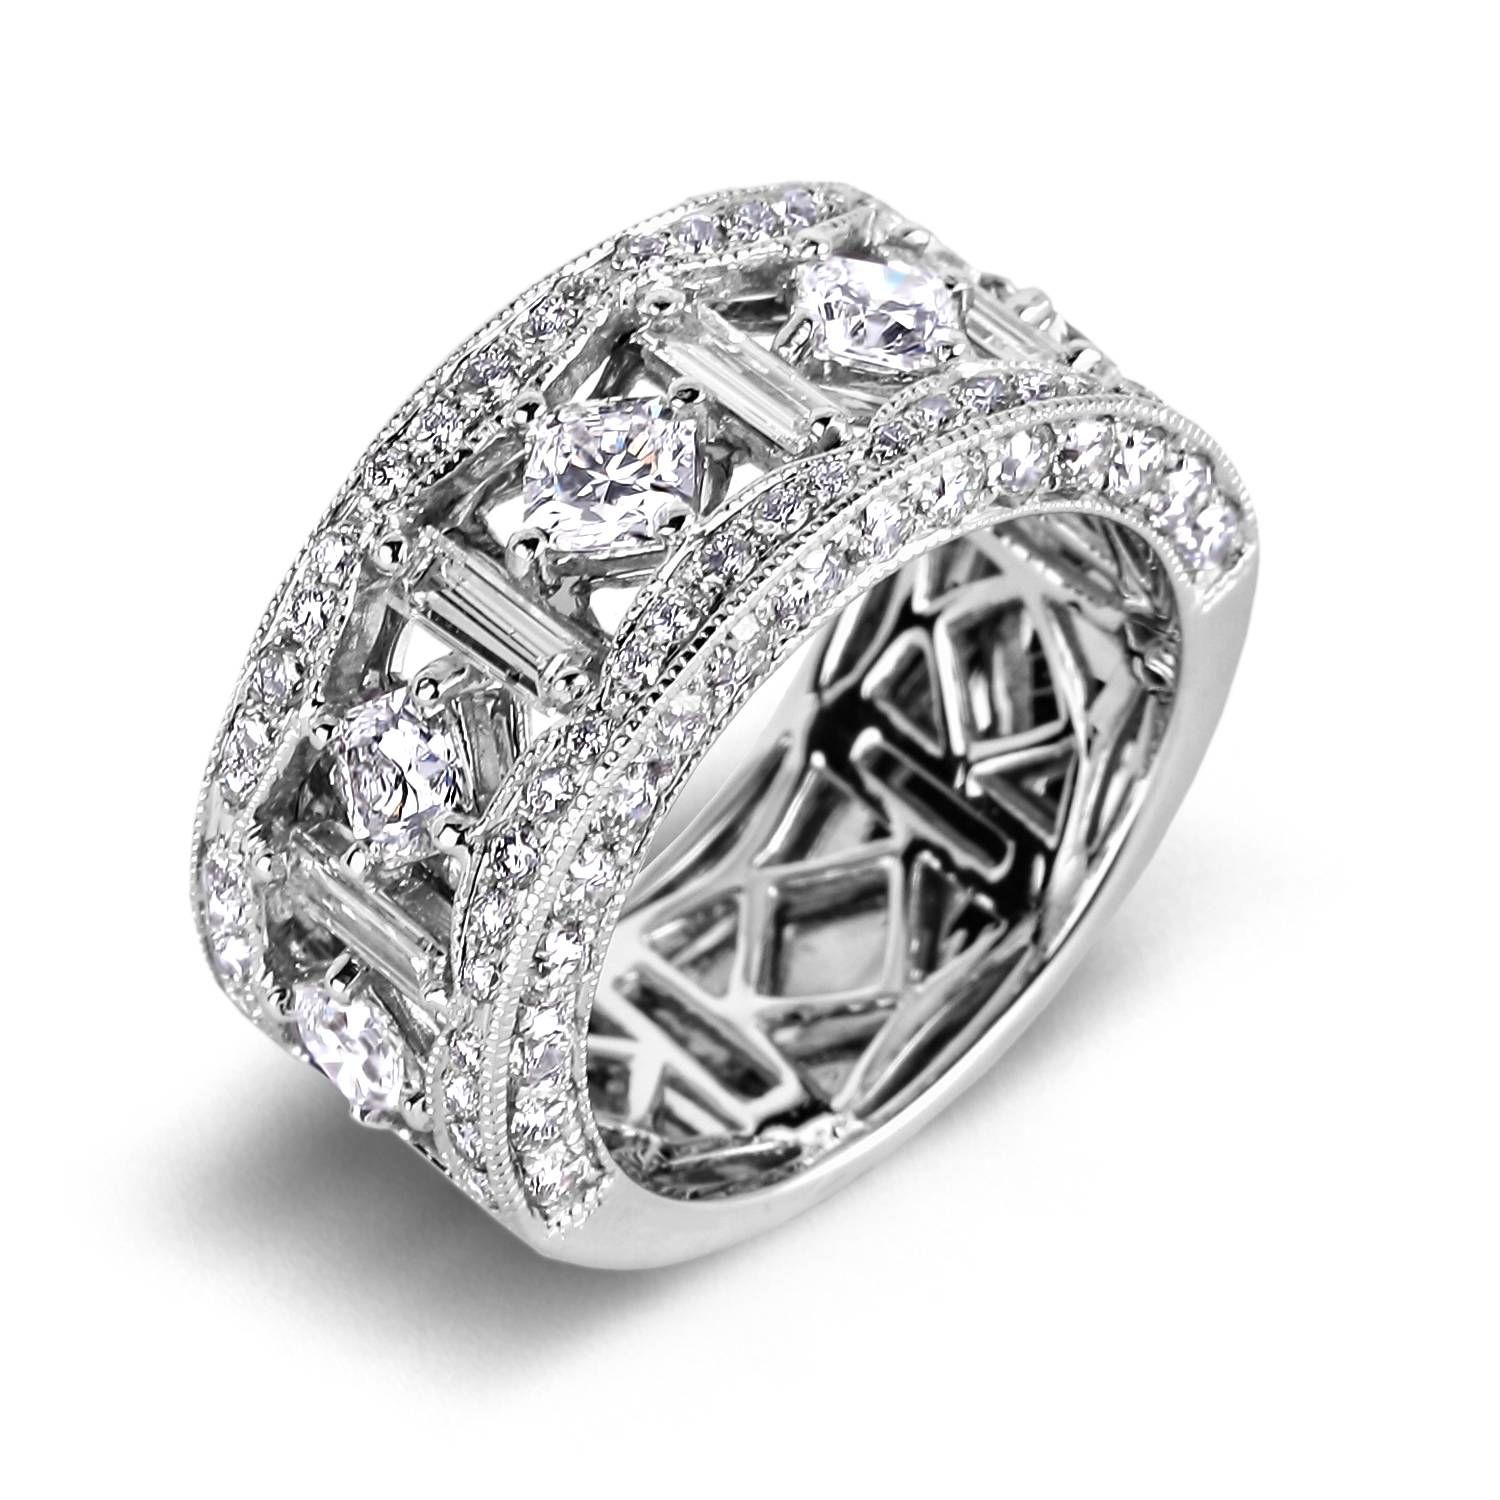 Wedding Anniversary Rings Diamonds | Wedding Ideas Pertaining To Newest Anniversary Rings With Baguettes (View 22 of 25)